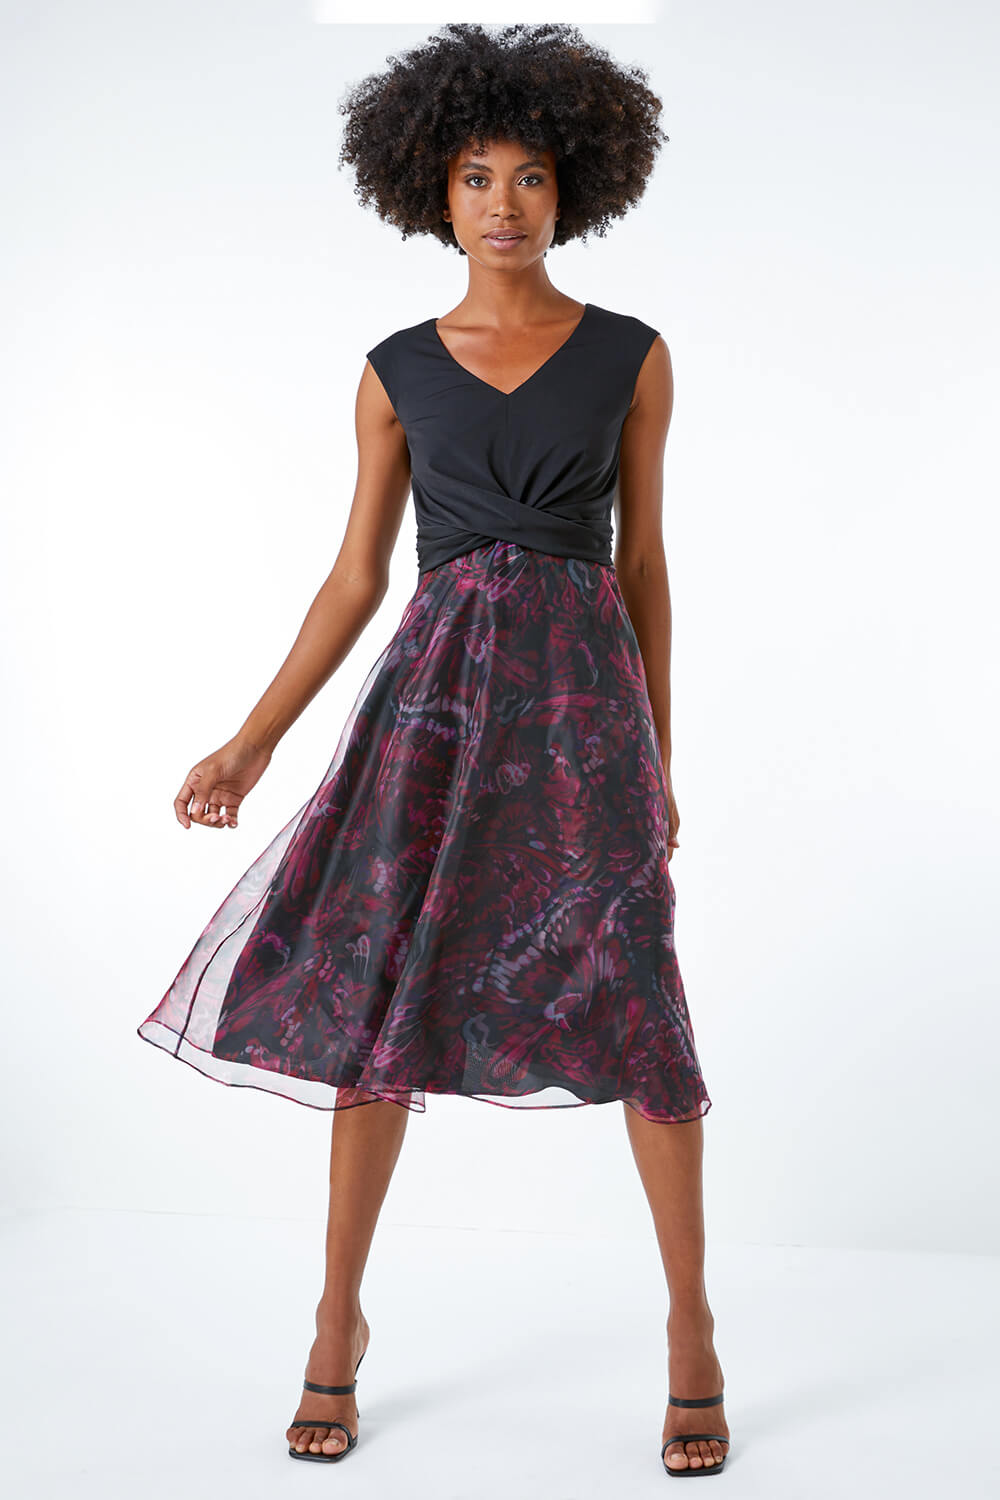 PINK Twist Front Butterfly Print Stretch Dress, Image 2 of 5